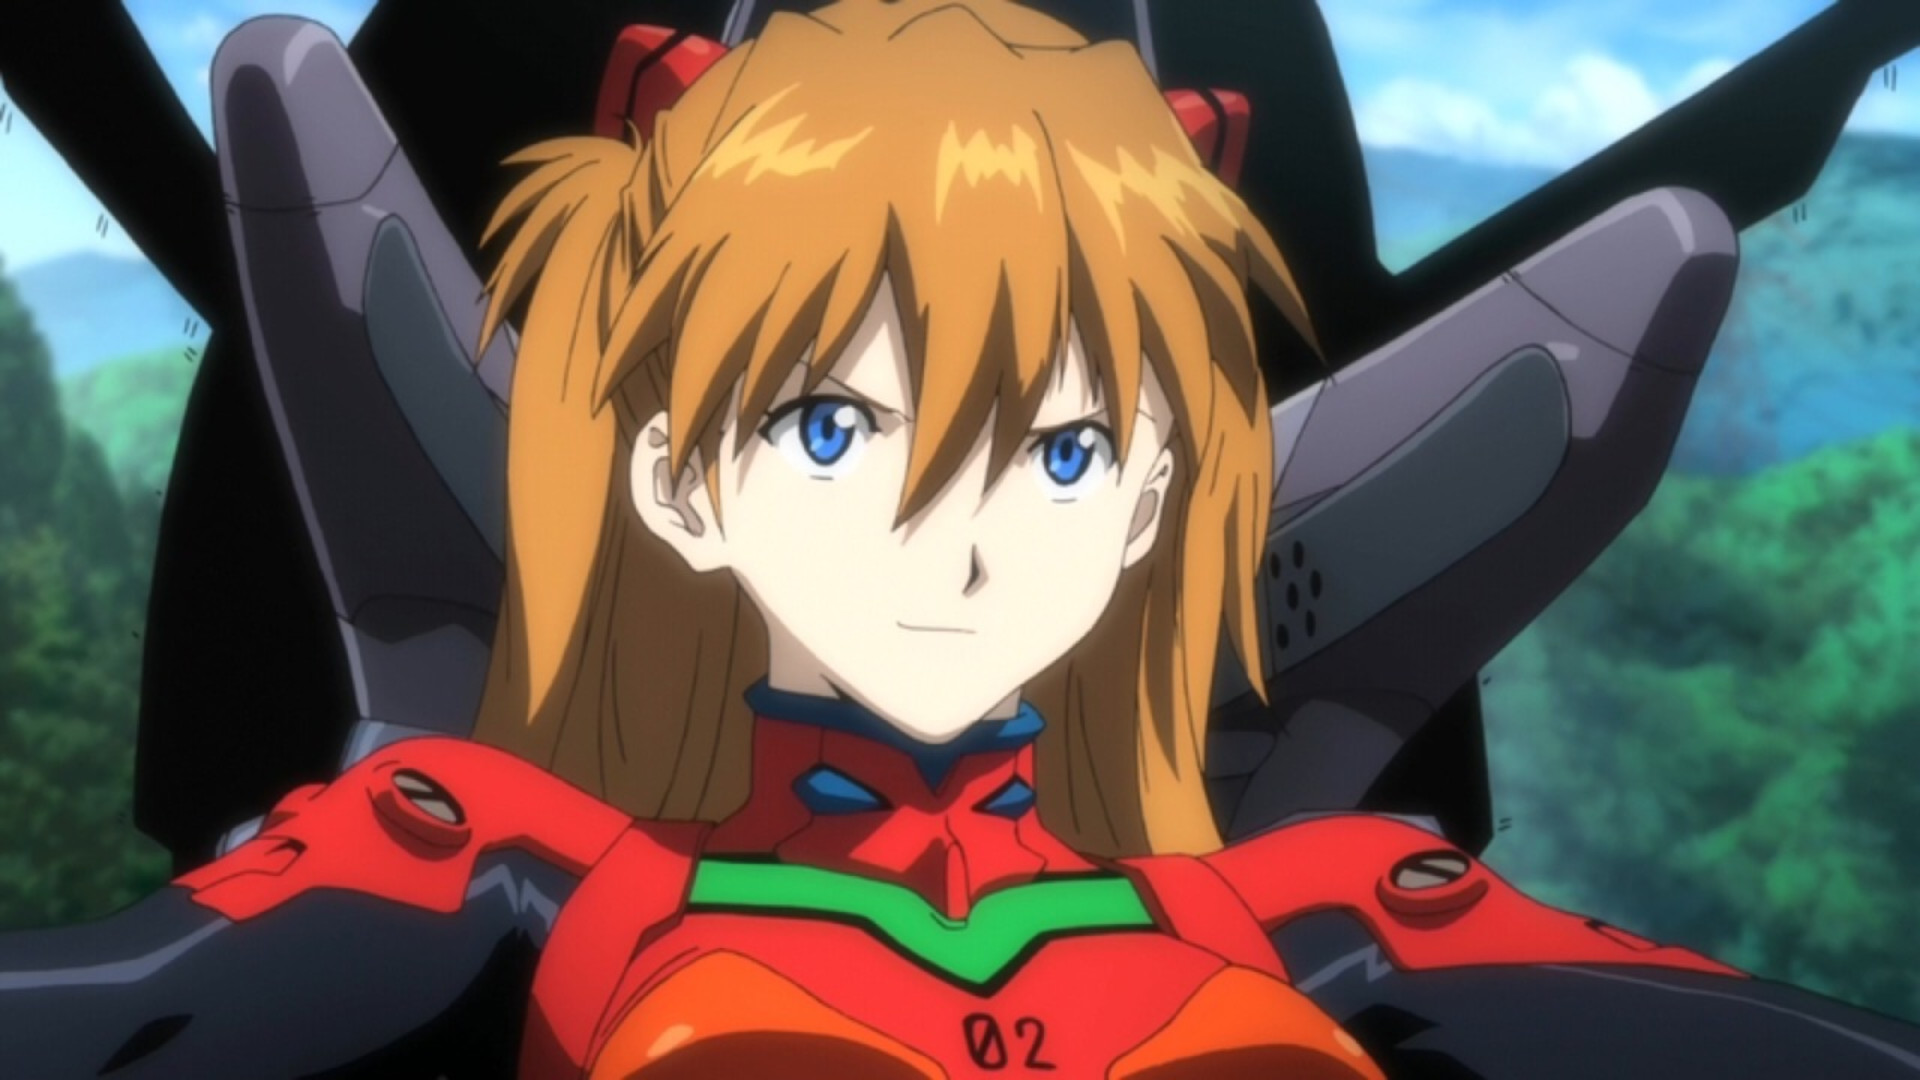  How to watch Neon Genesis Evangelion in order - including the Rebuild movies 